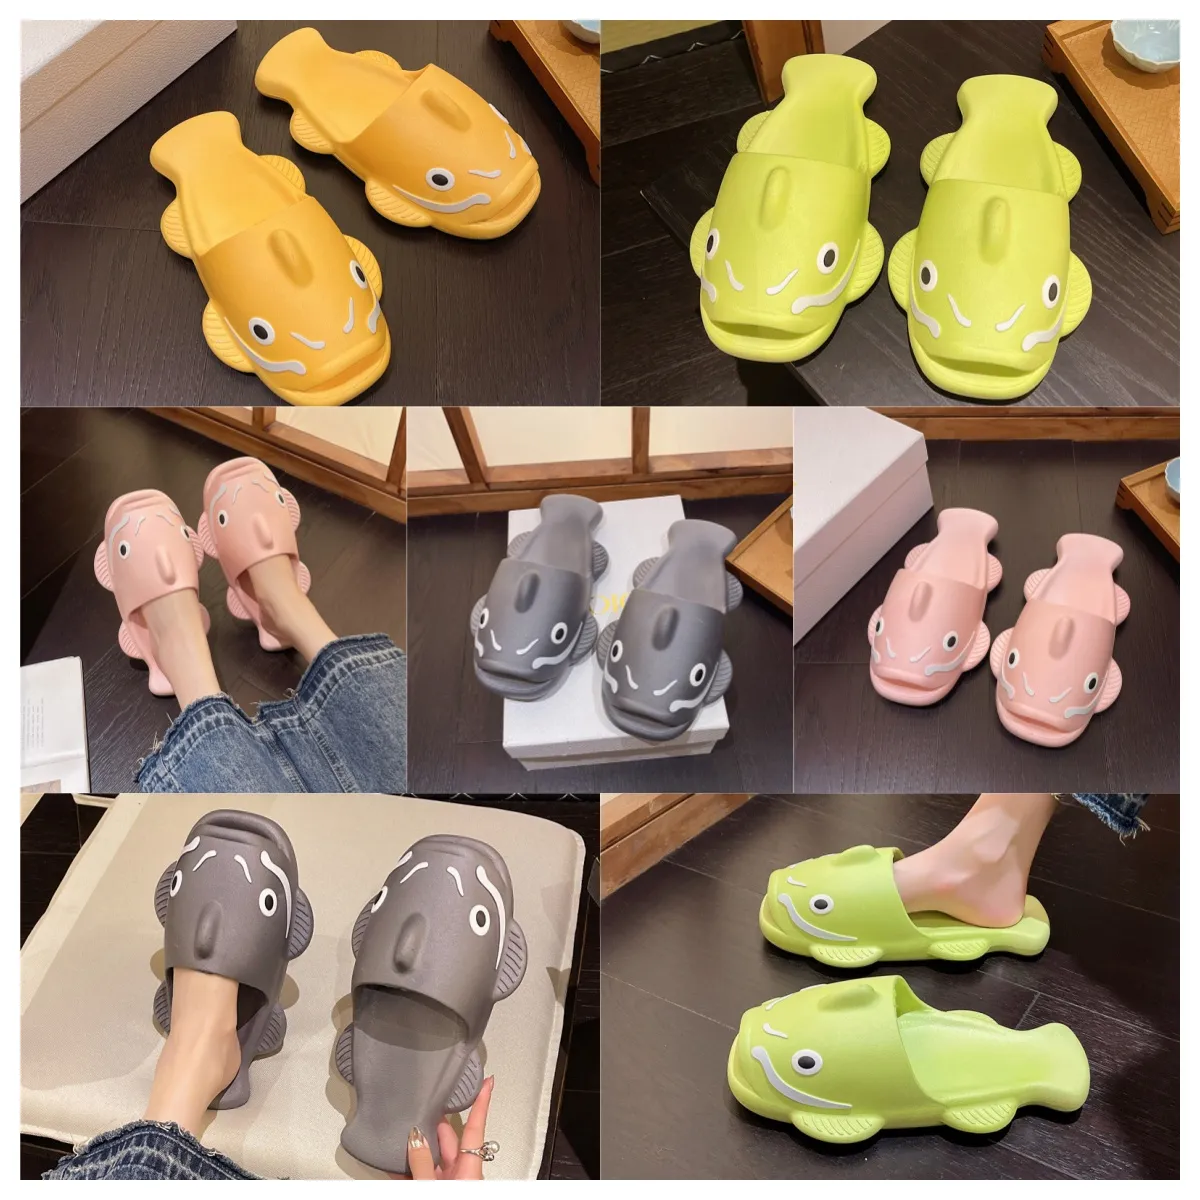 New top Luxury Designer Funny Personalized Slippers Men Wearing Externally Summer Home pink green Non slip Soft Sole Couples Stepping Feeling Cool sandal Women